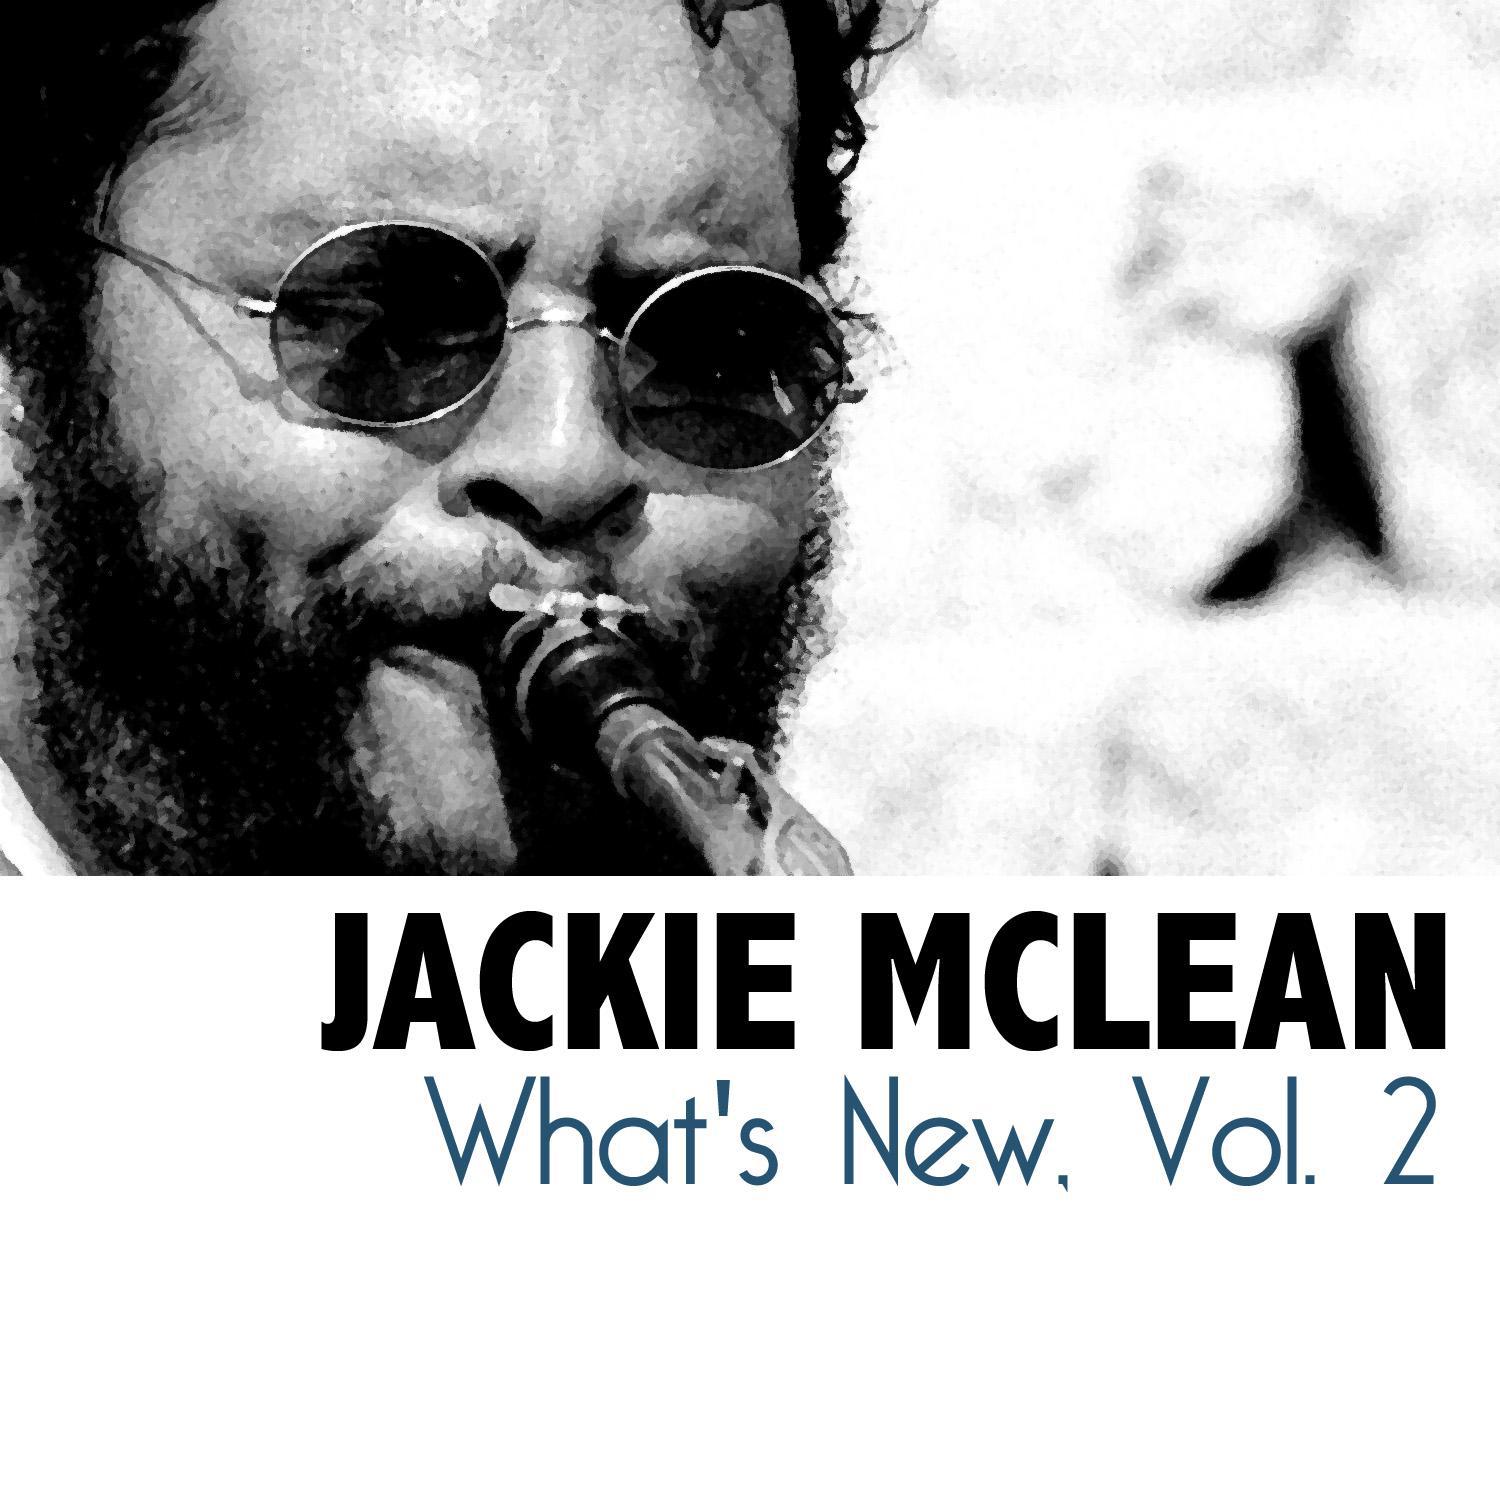 What's New, Vol. 2